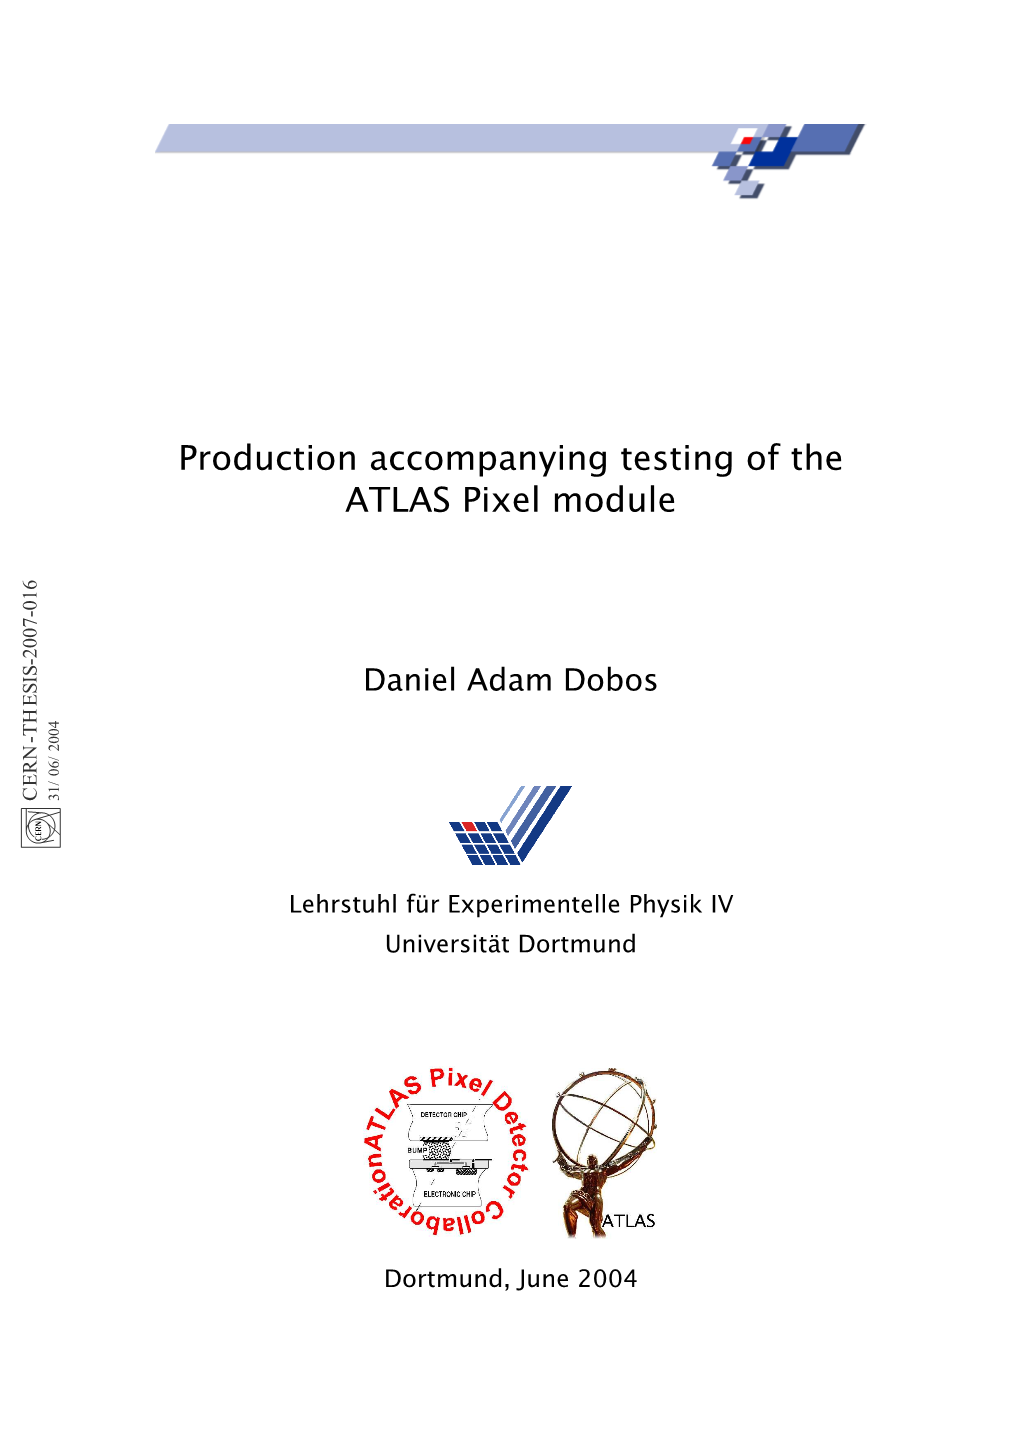 Production Accompanying Testing of the ATLAS Pixel Module